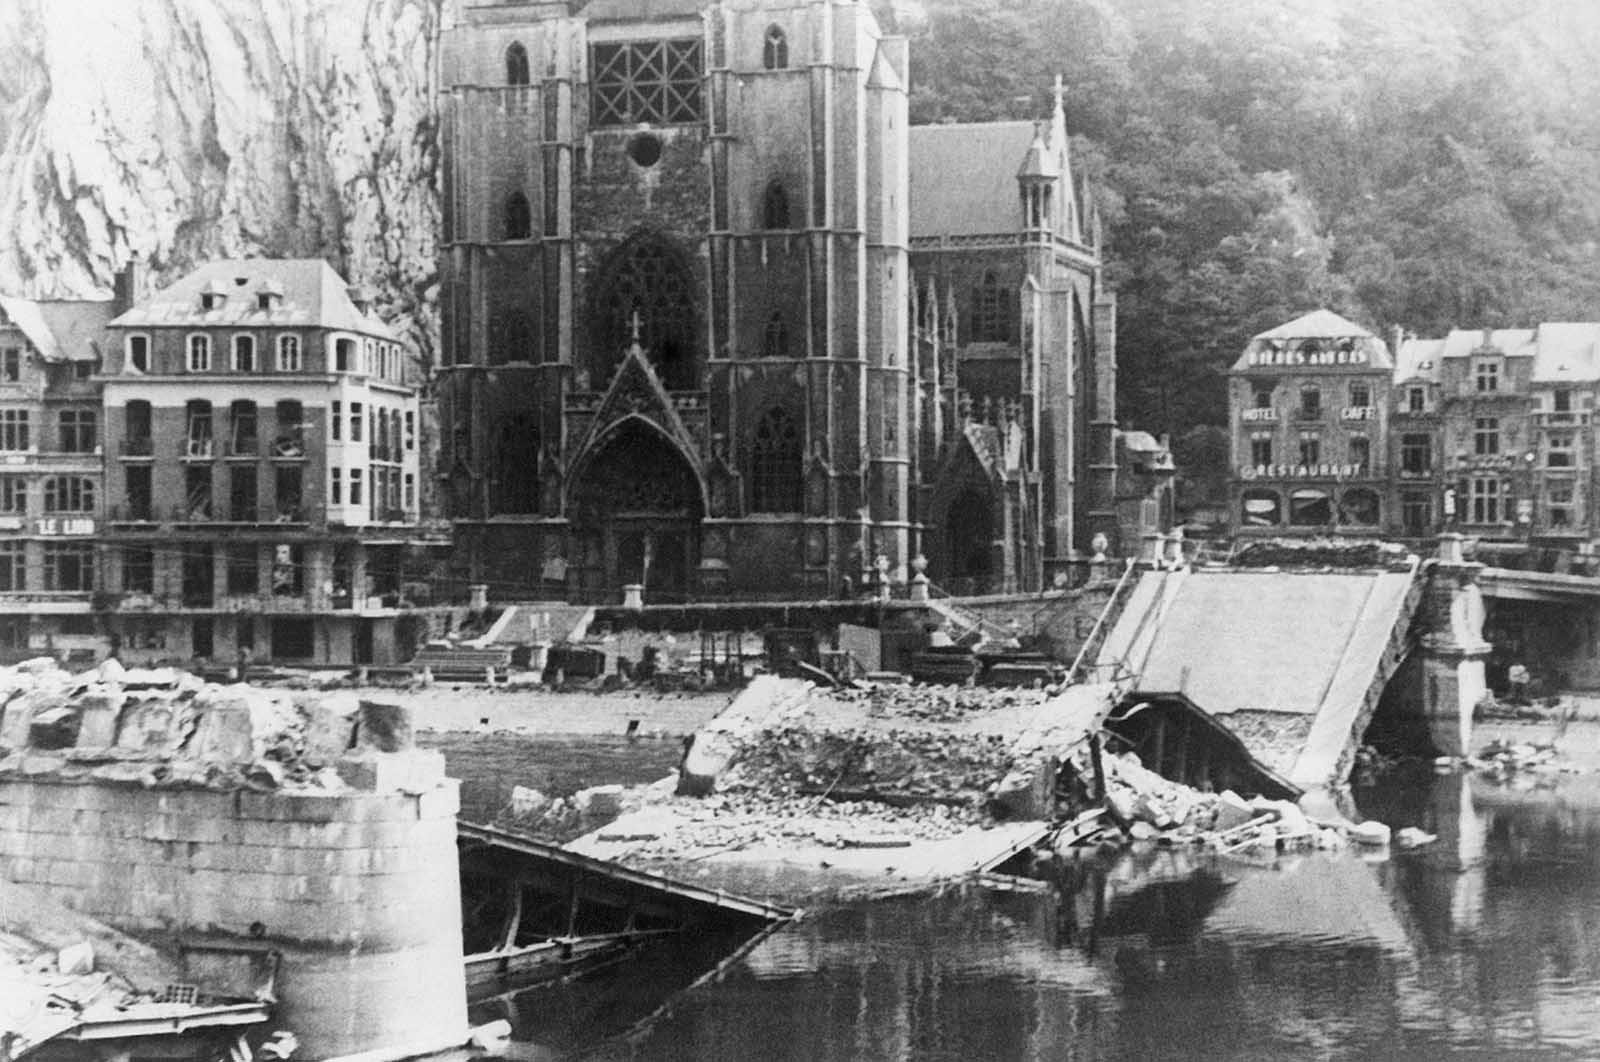 Belgians blasted this bridge across the Meuse River in the town of Dinant, Belgium, but shortly, a wooden bridge built by German sappers was standing next to the ruins, on June 20, 1940.